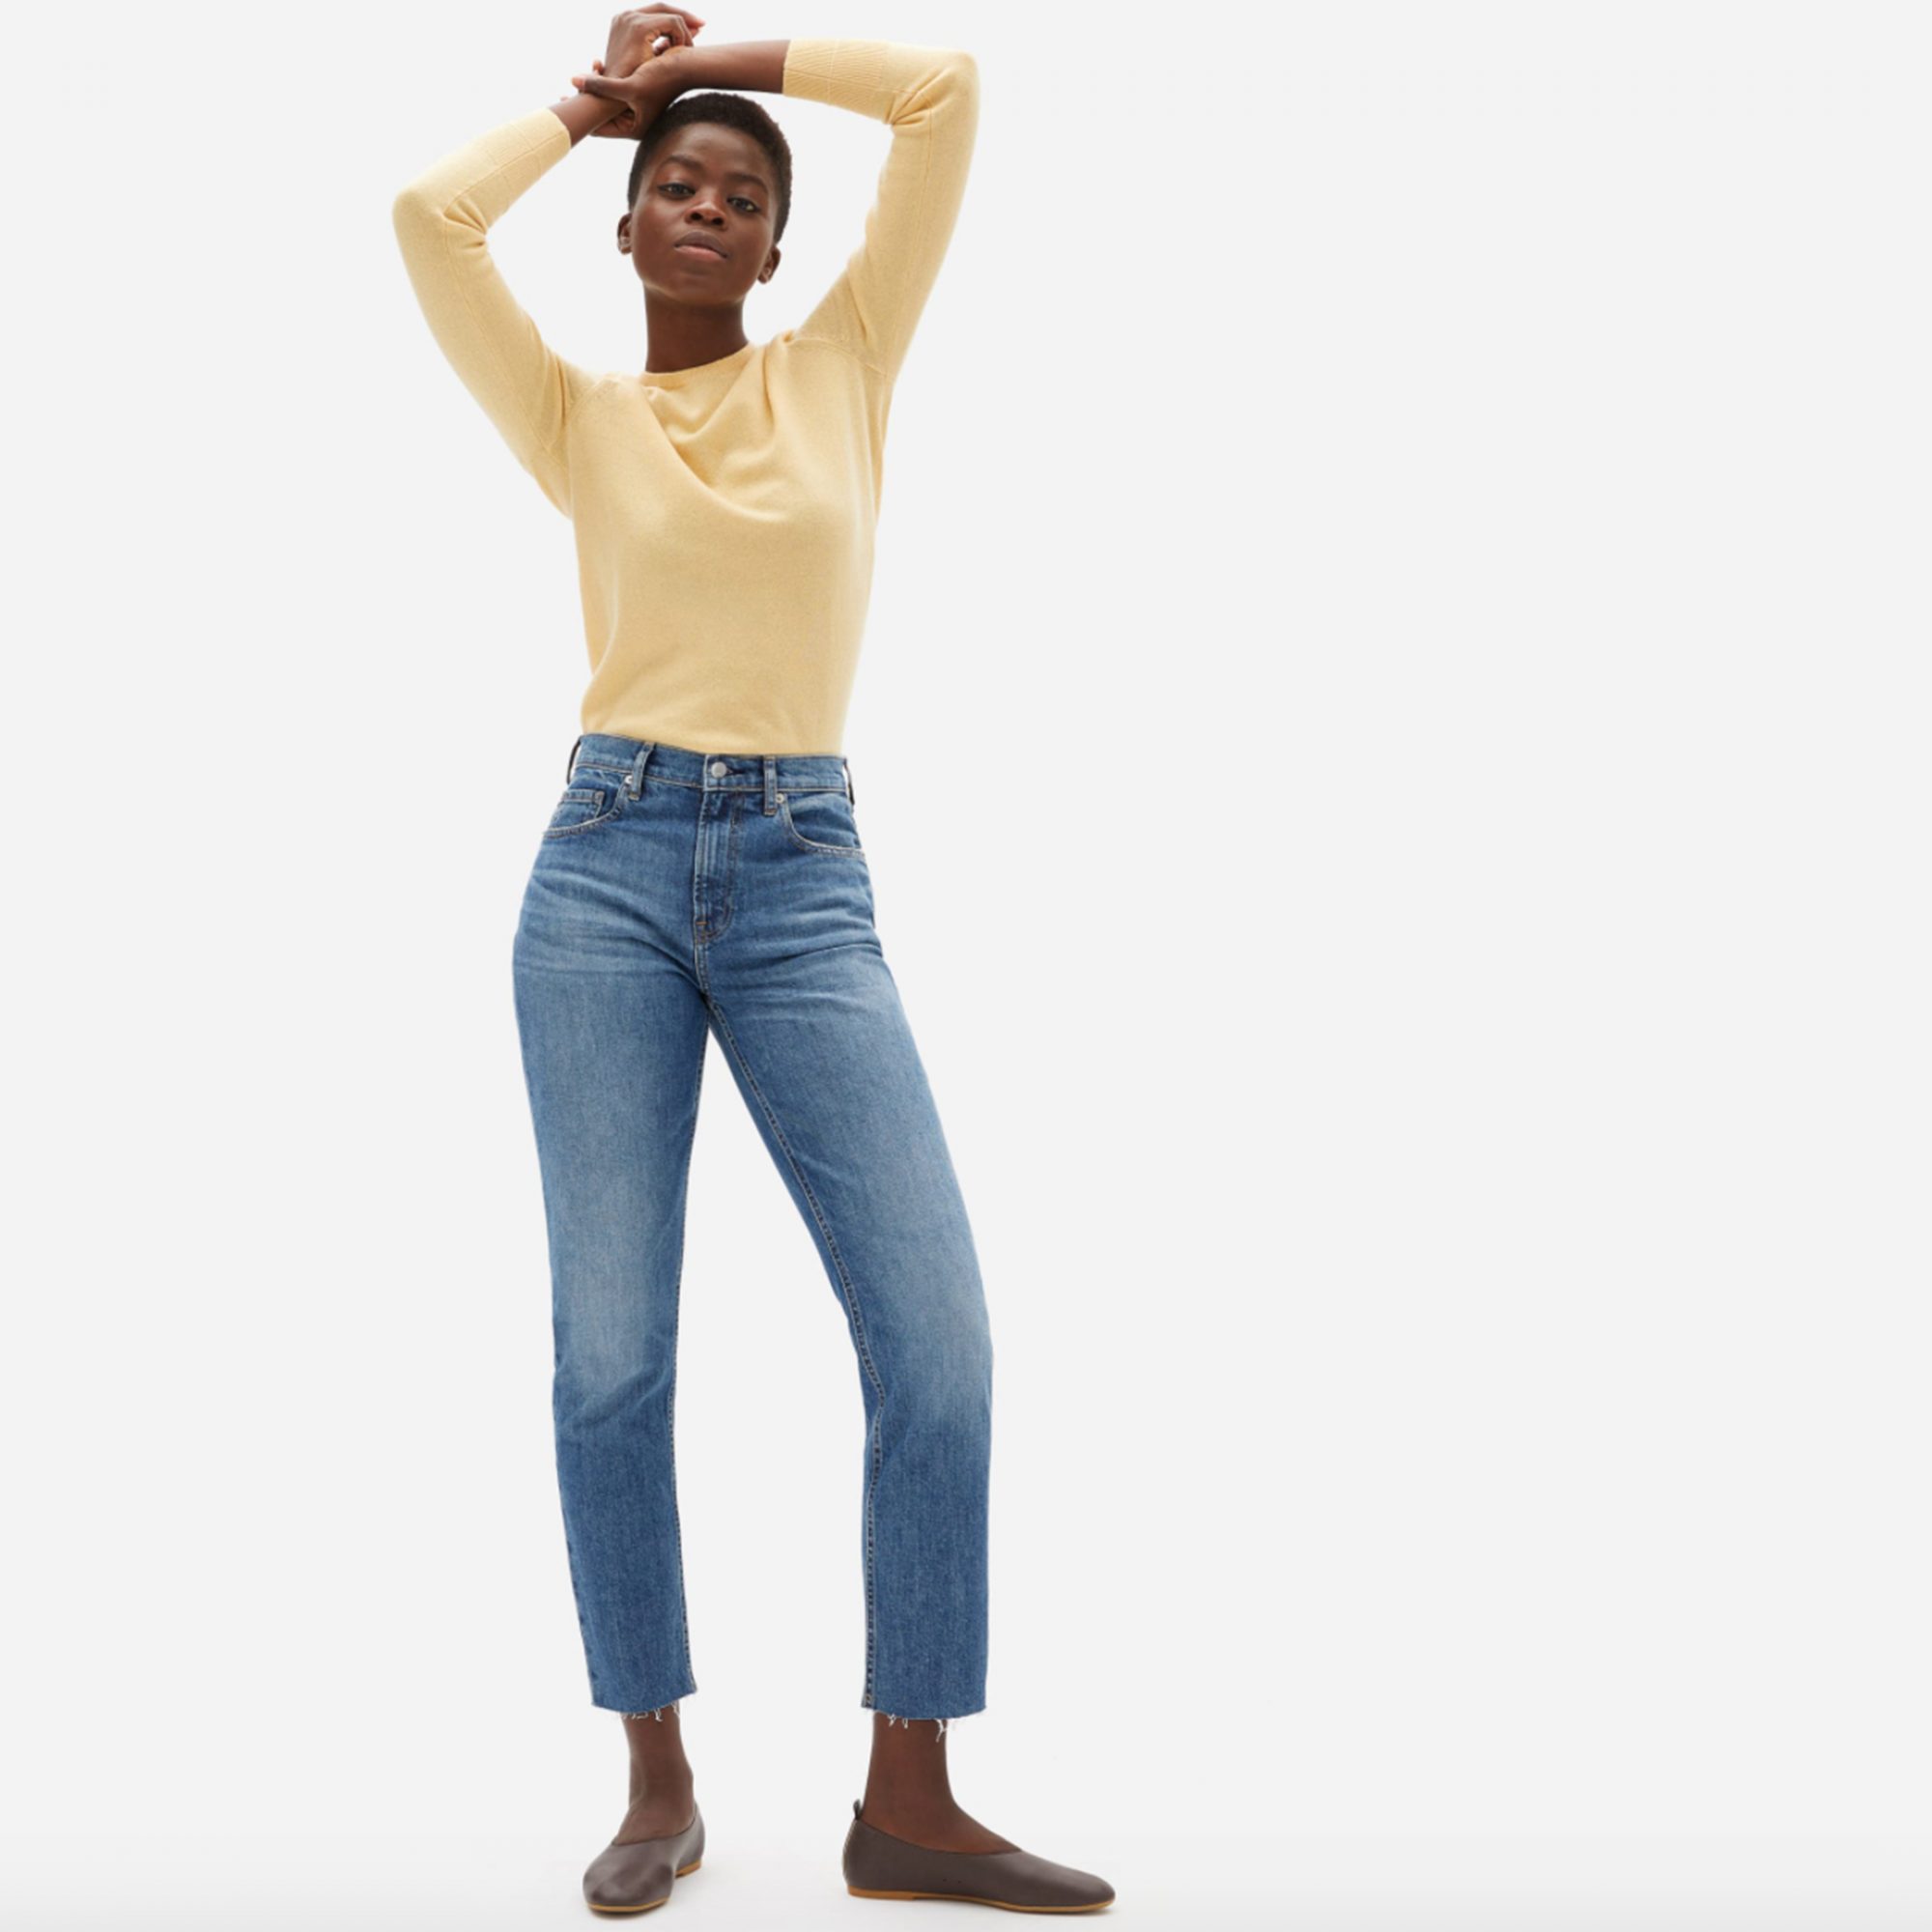 How to choose the perfect jeans, according to your body type